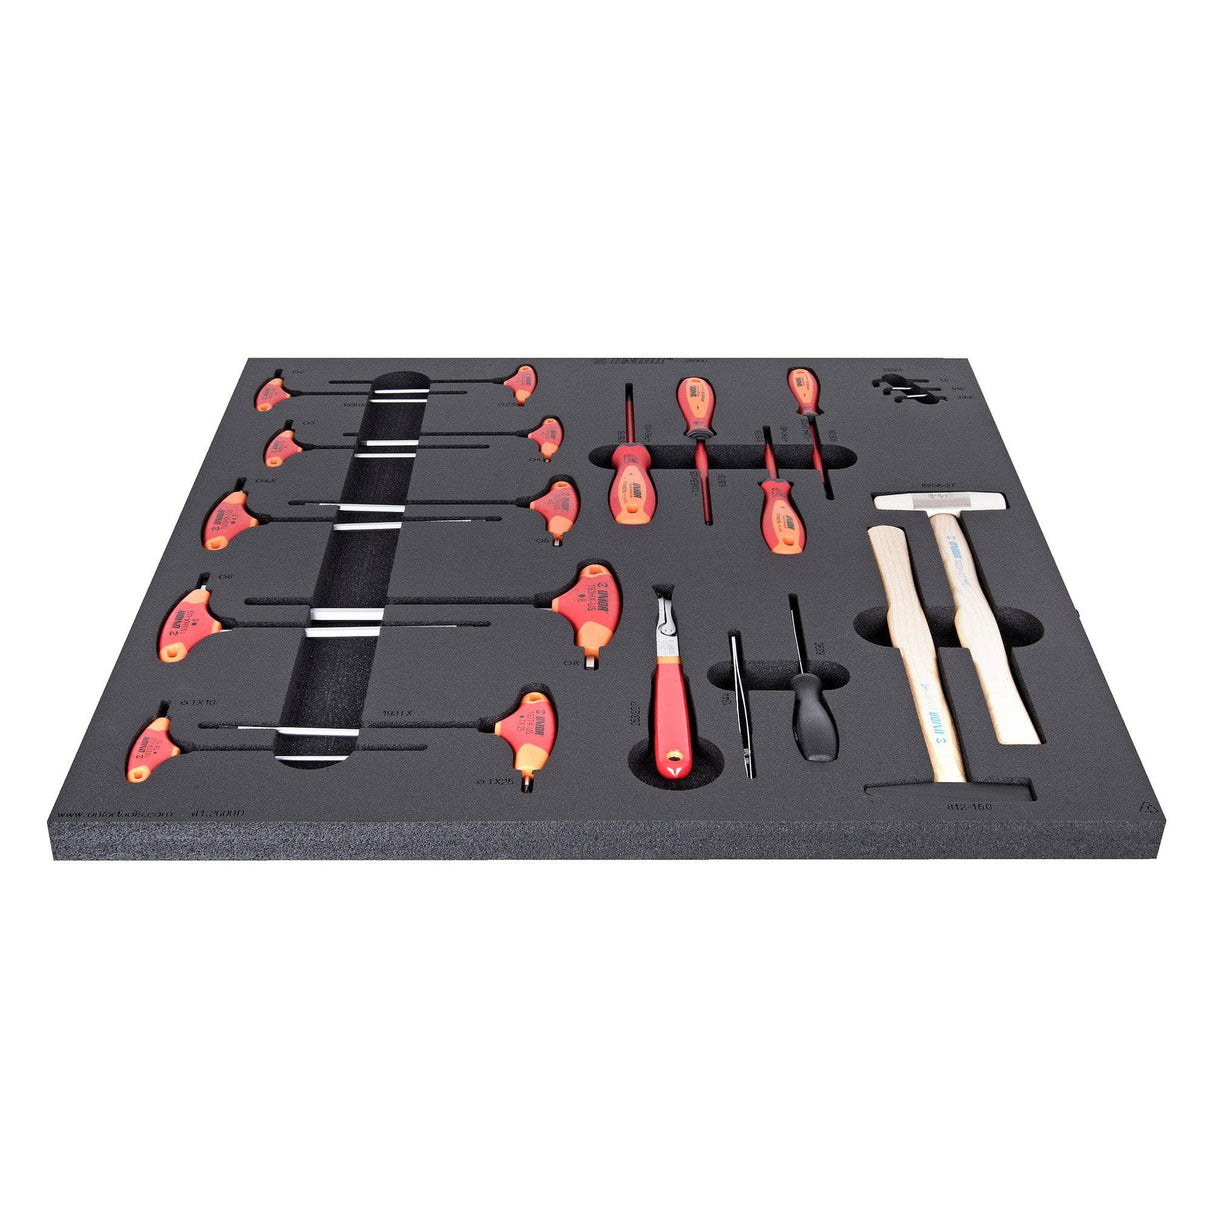 Unior Set Of Tools In Tray 1 For 2600D: Red